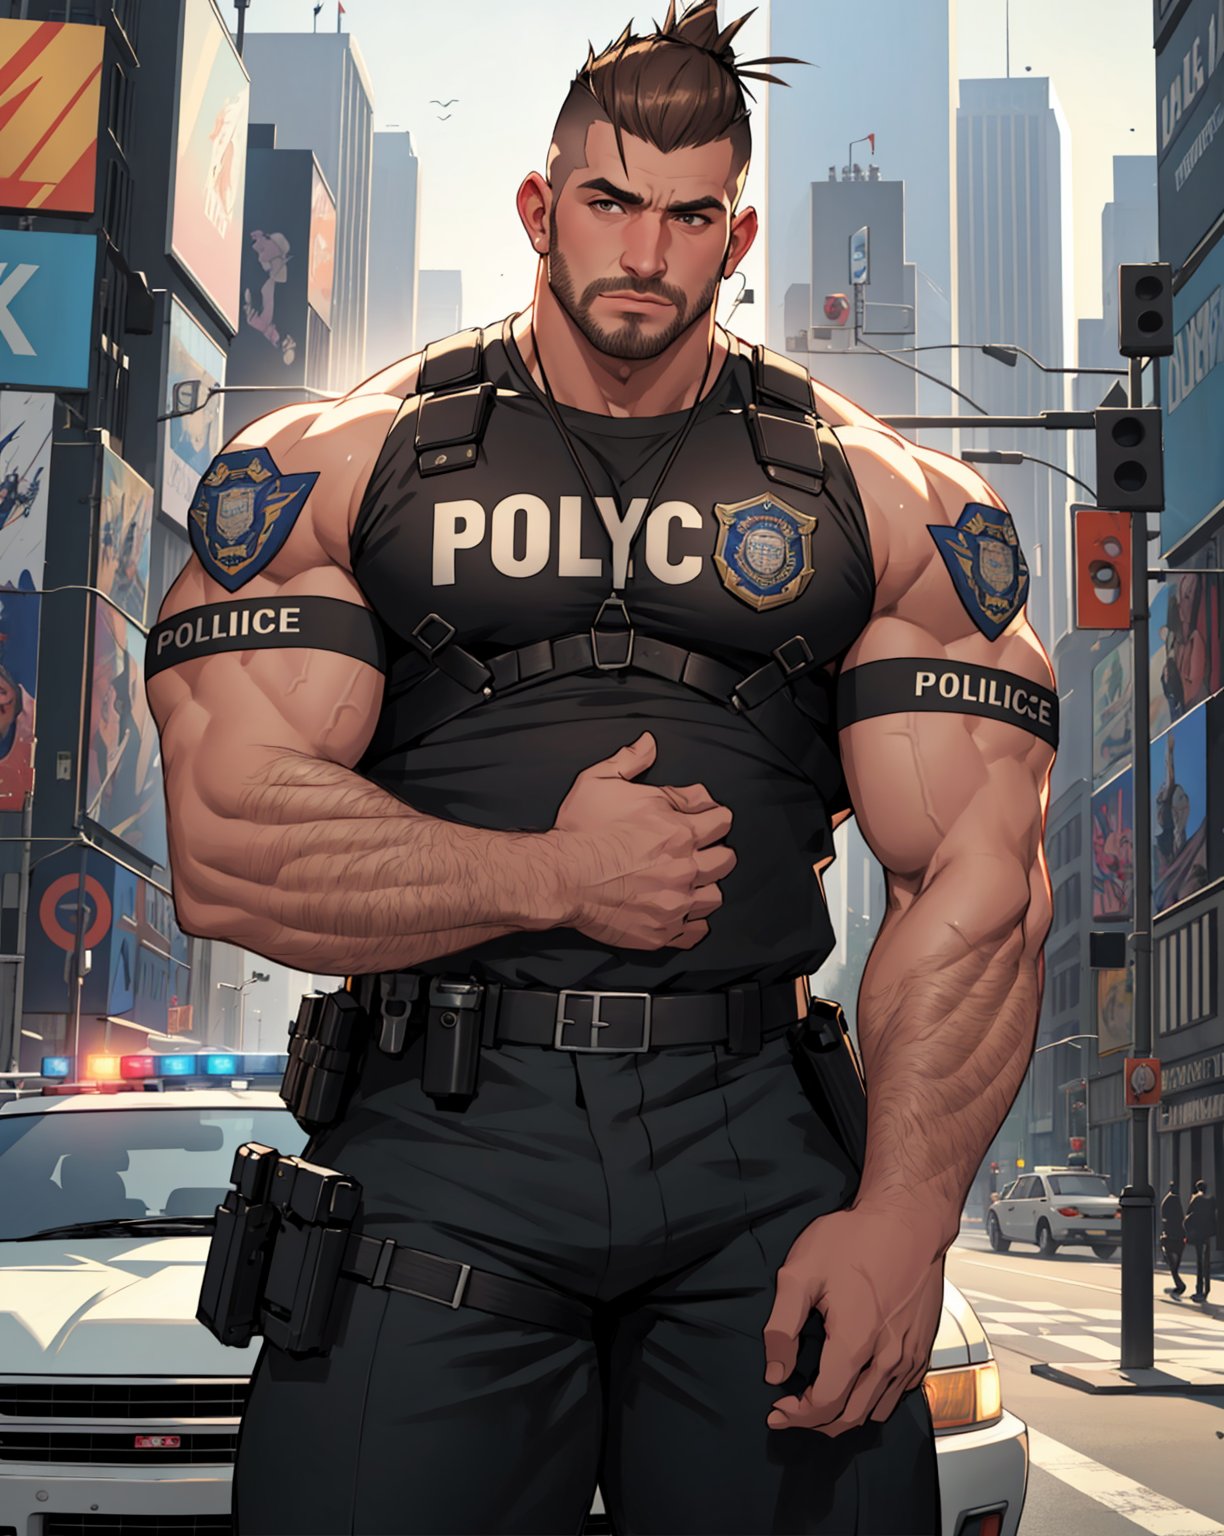 Best Quality, Masterpiece, Ultra High Resolution, Detailed Background, Muscular Man, Shaved Hair, Punk Crest, brown hair, Arm Hair, Thick Chunky Arms, Thick Thighs, Naked, Hairy, Police Officer Outfit, police t-shirt, big lump, police car in the background, New York background, 4k resolution